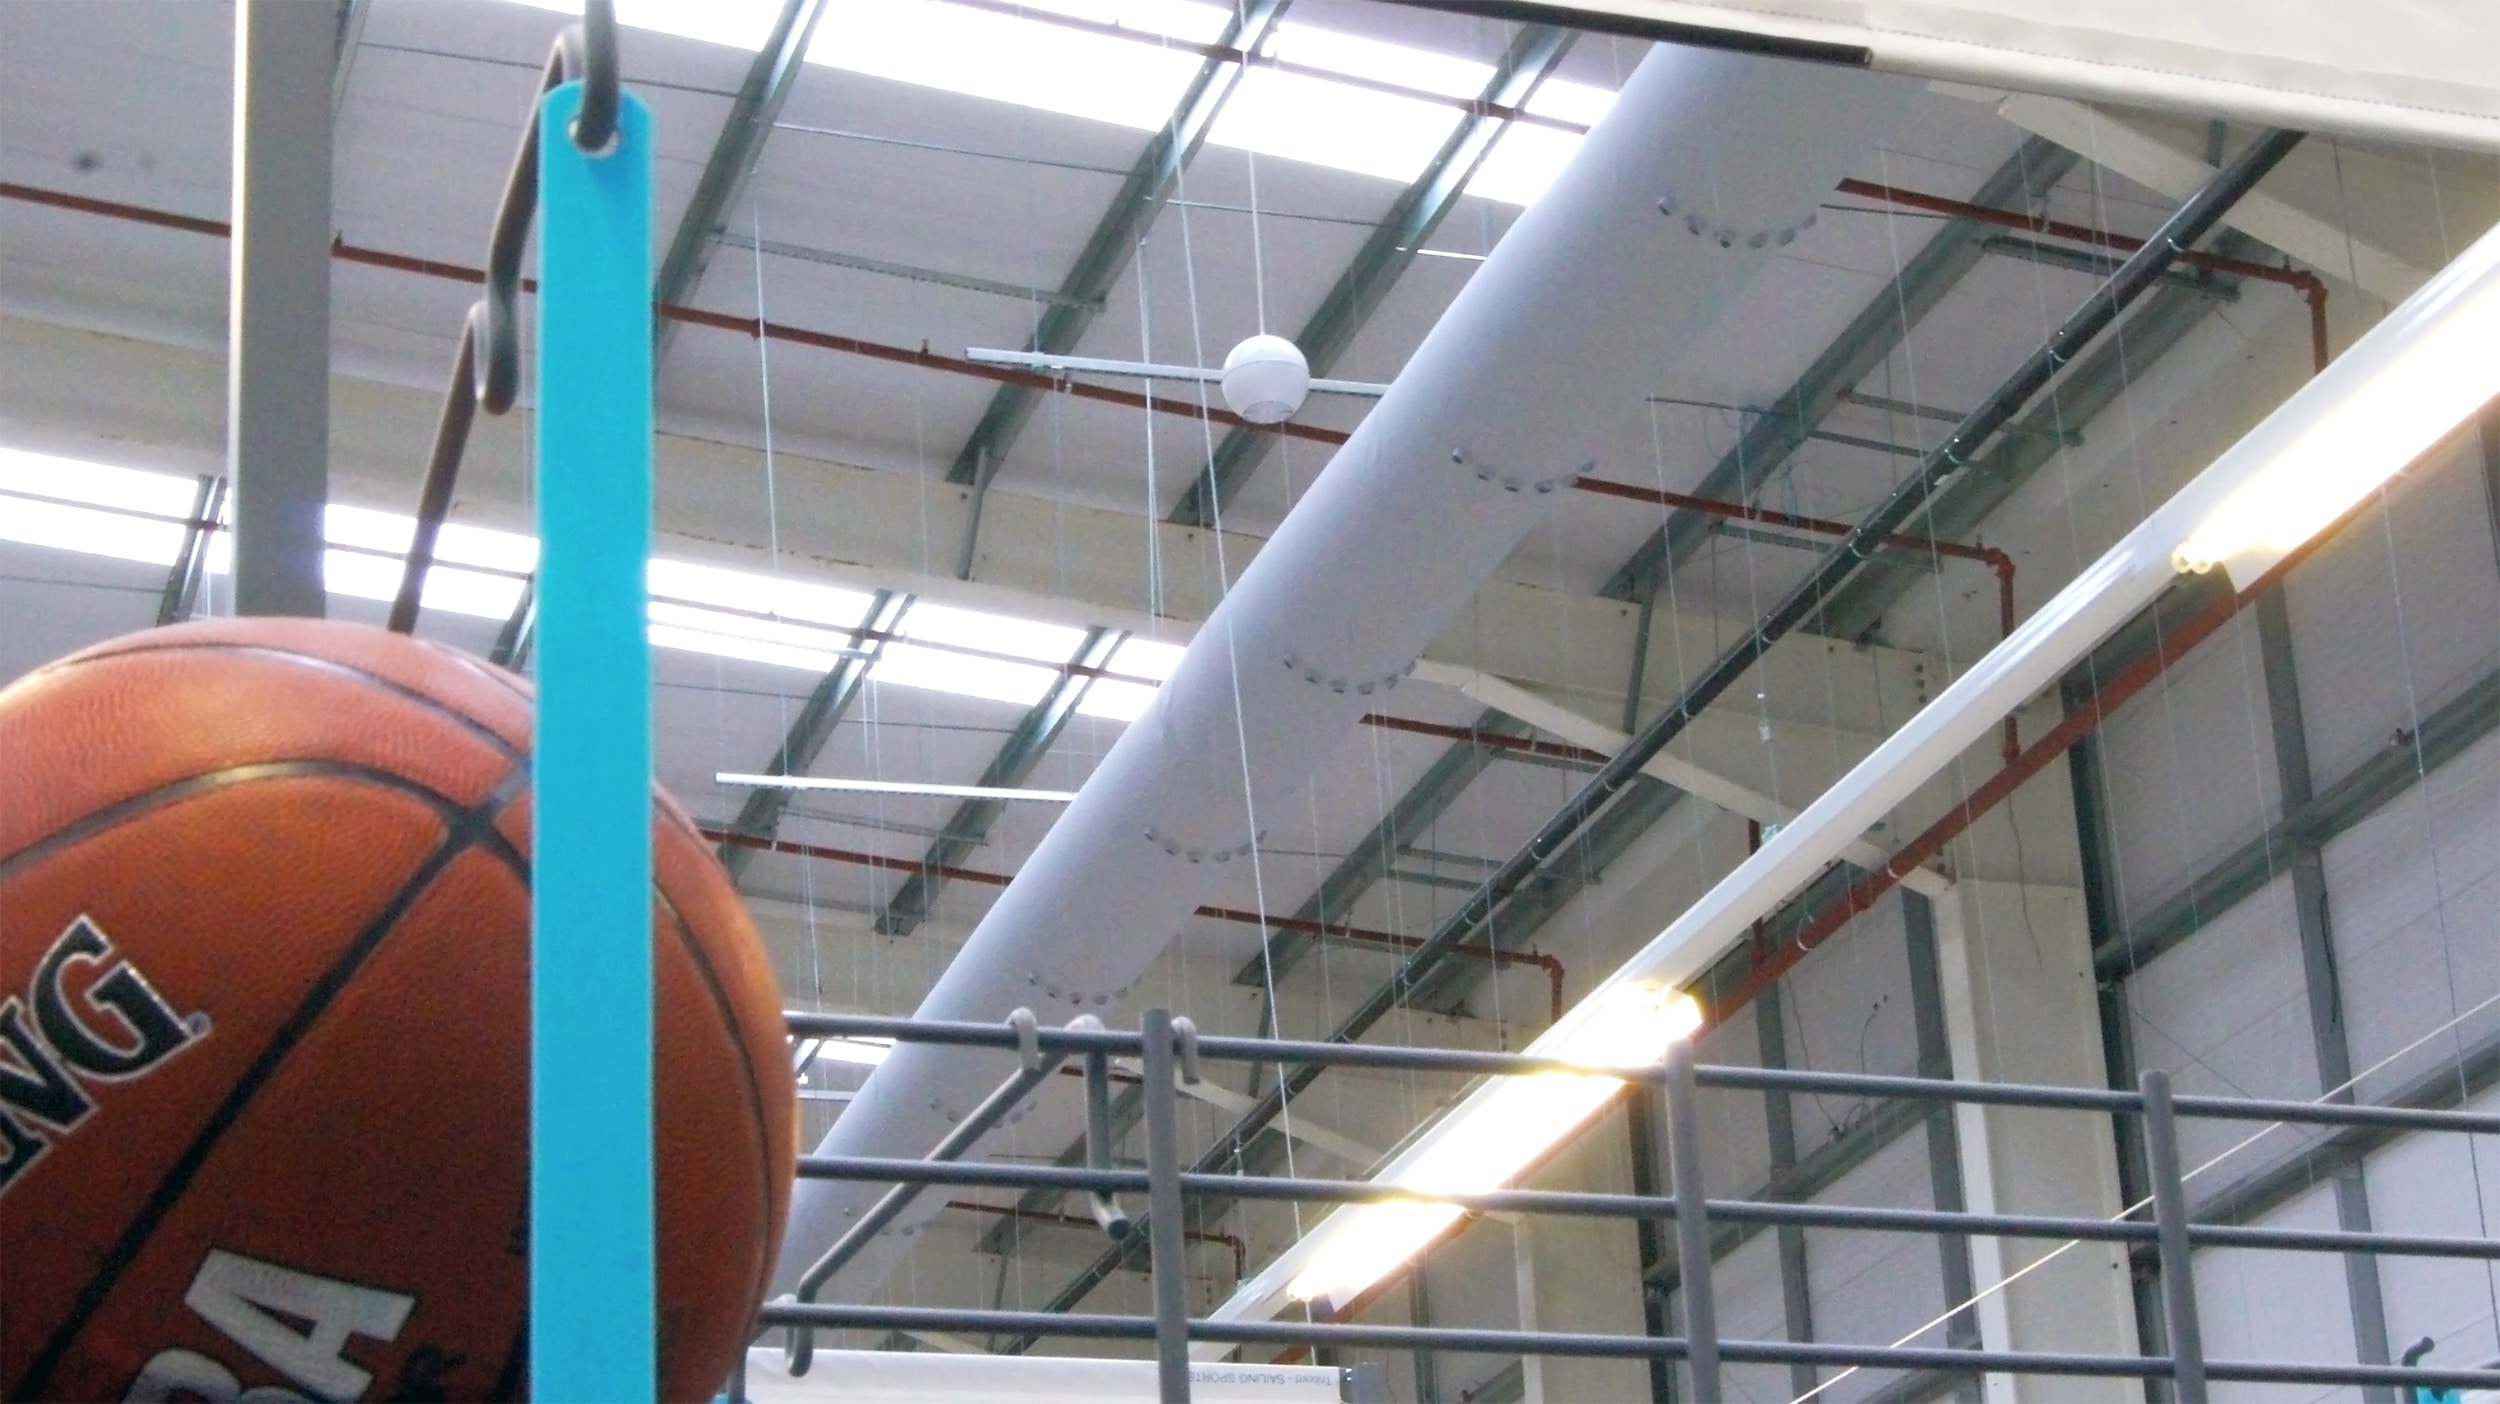 Prihoda fabric duct with nozzles at Decathlon